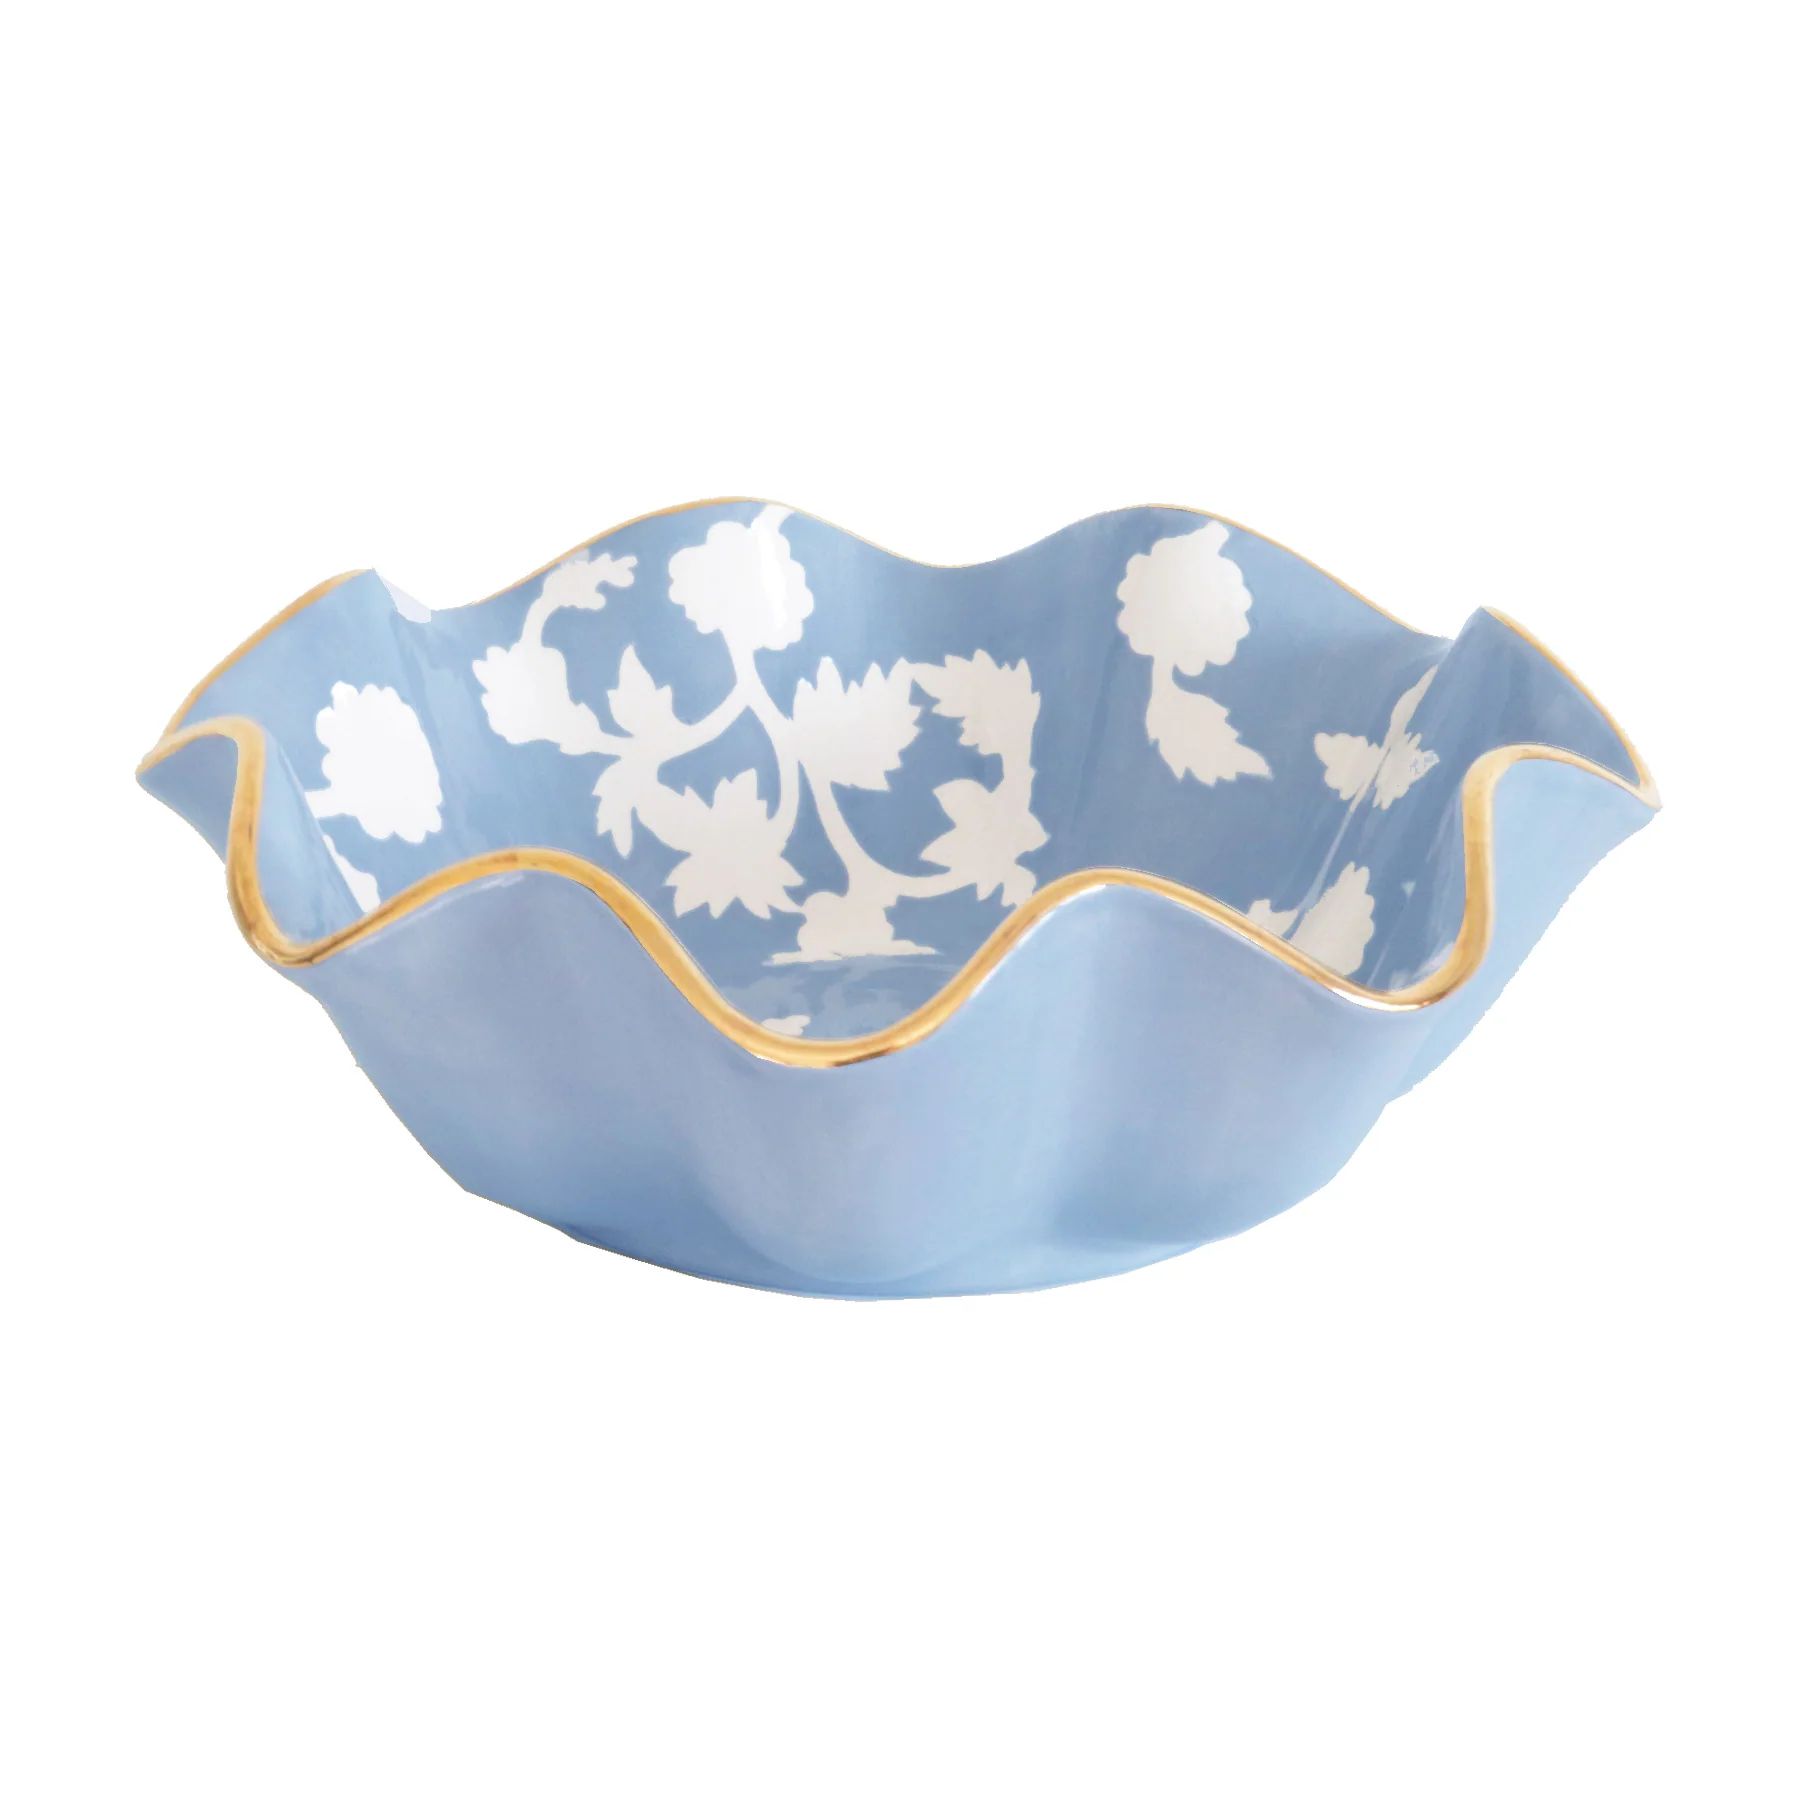 Chinoiserie Dreams Scalloped Bowls with 22K Gold Accent | Lo Home by Lauren Haskell Designs